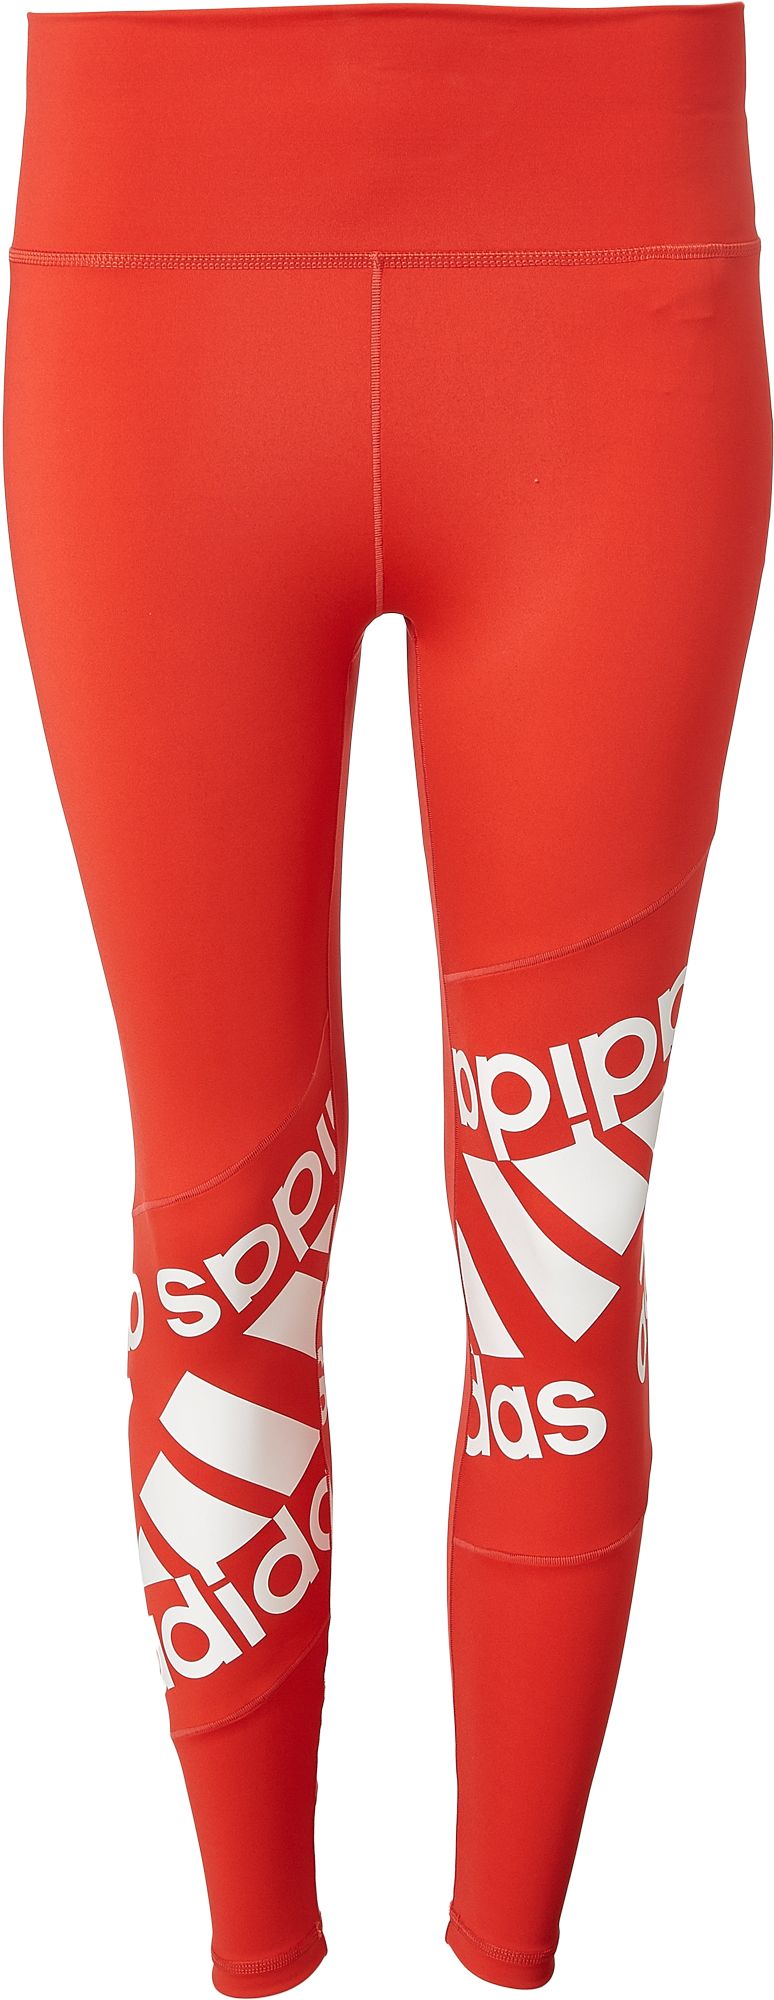 adidas tights red